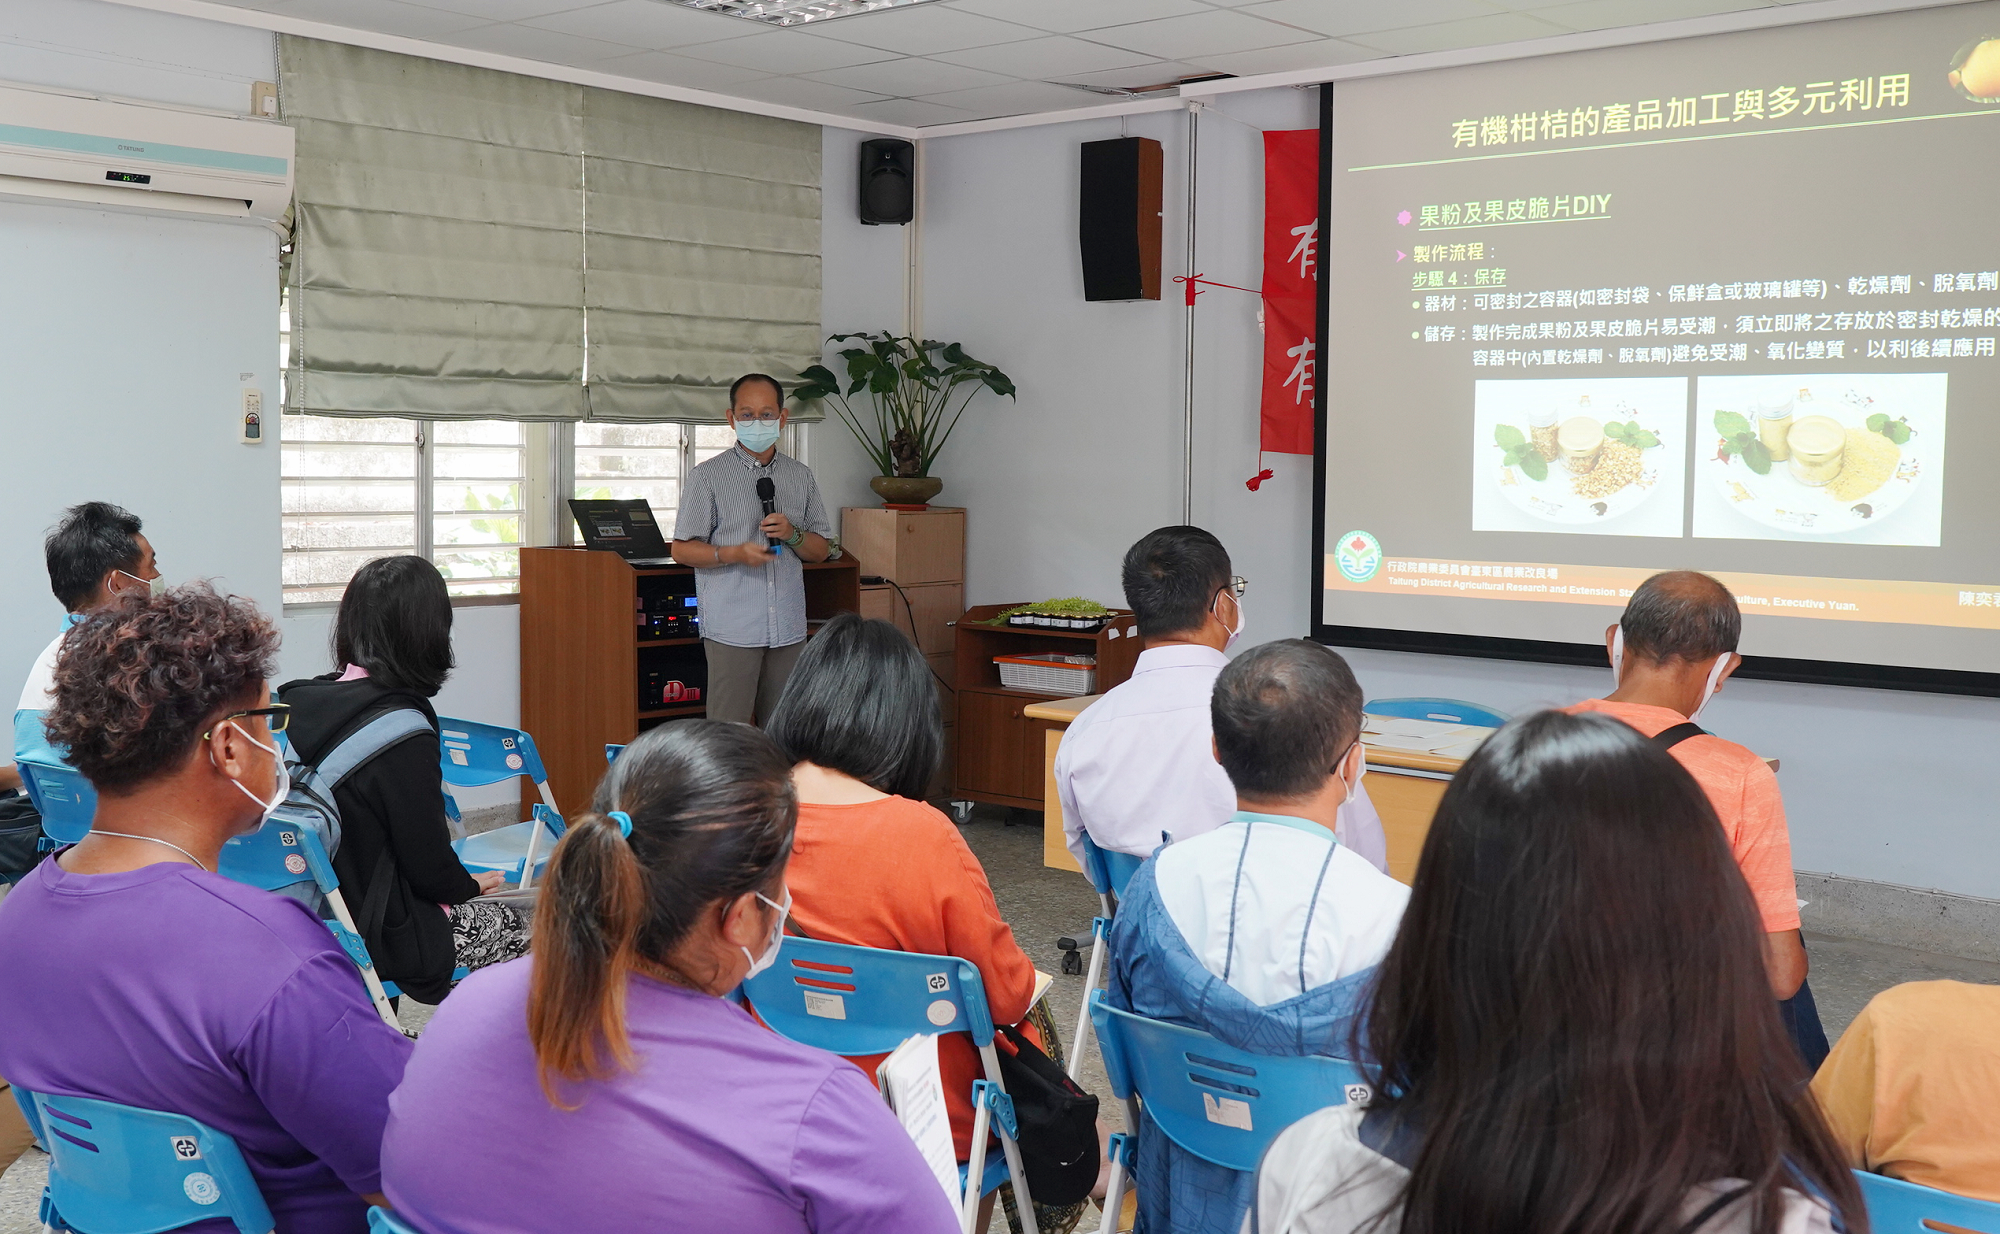 “Lecture on Multi-Application Techniques for Organic Fruit” Held on August 17, 2022, at Banchiu Branch Station